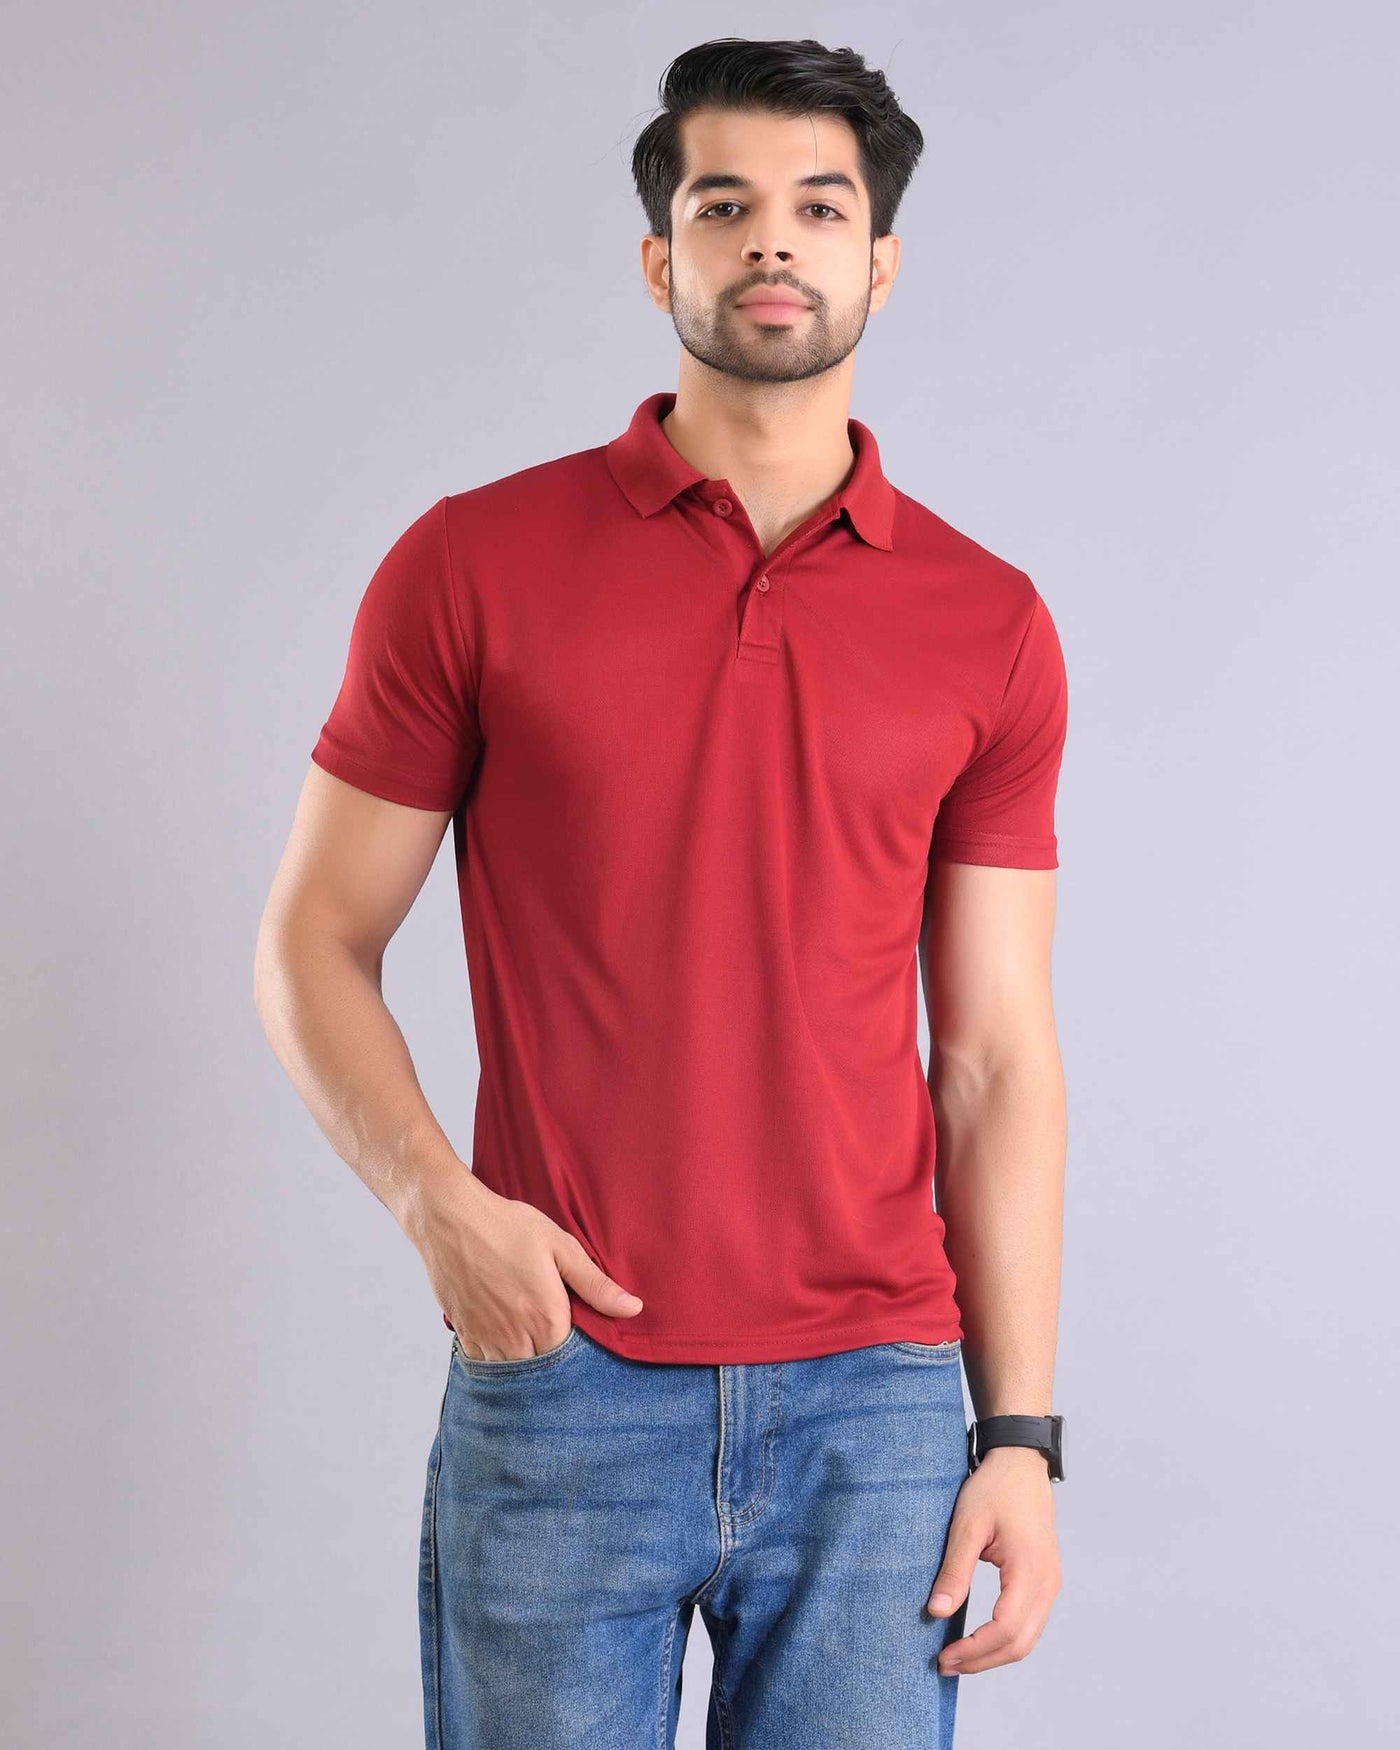 Dry Fit Maroon Polo T-Shirt